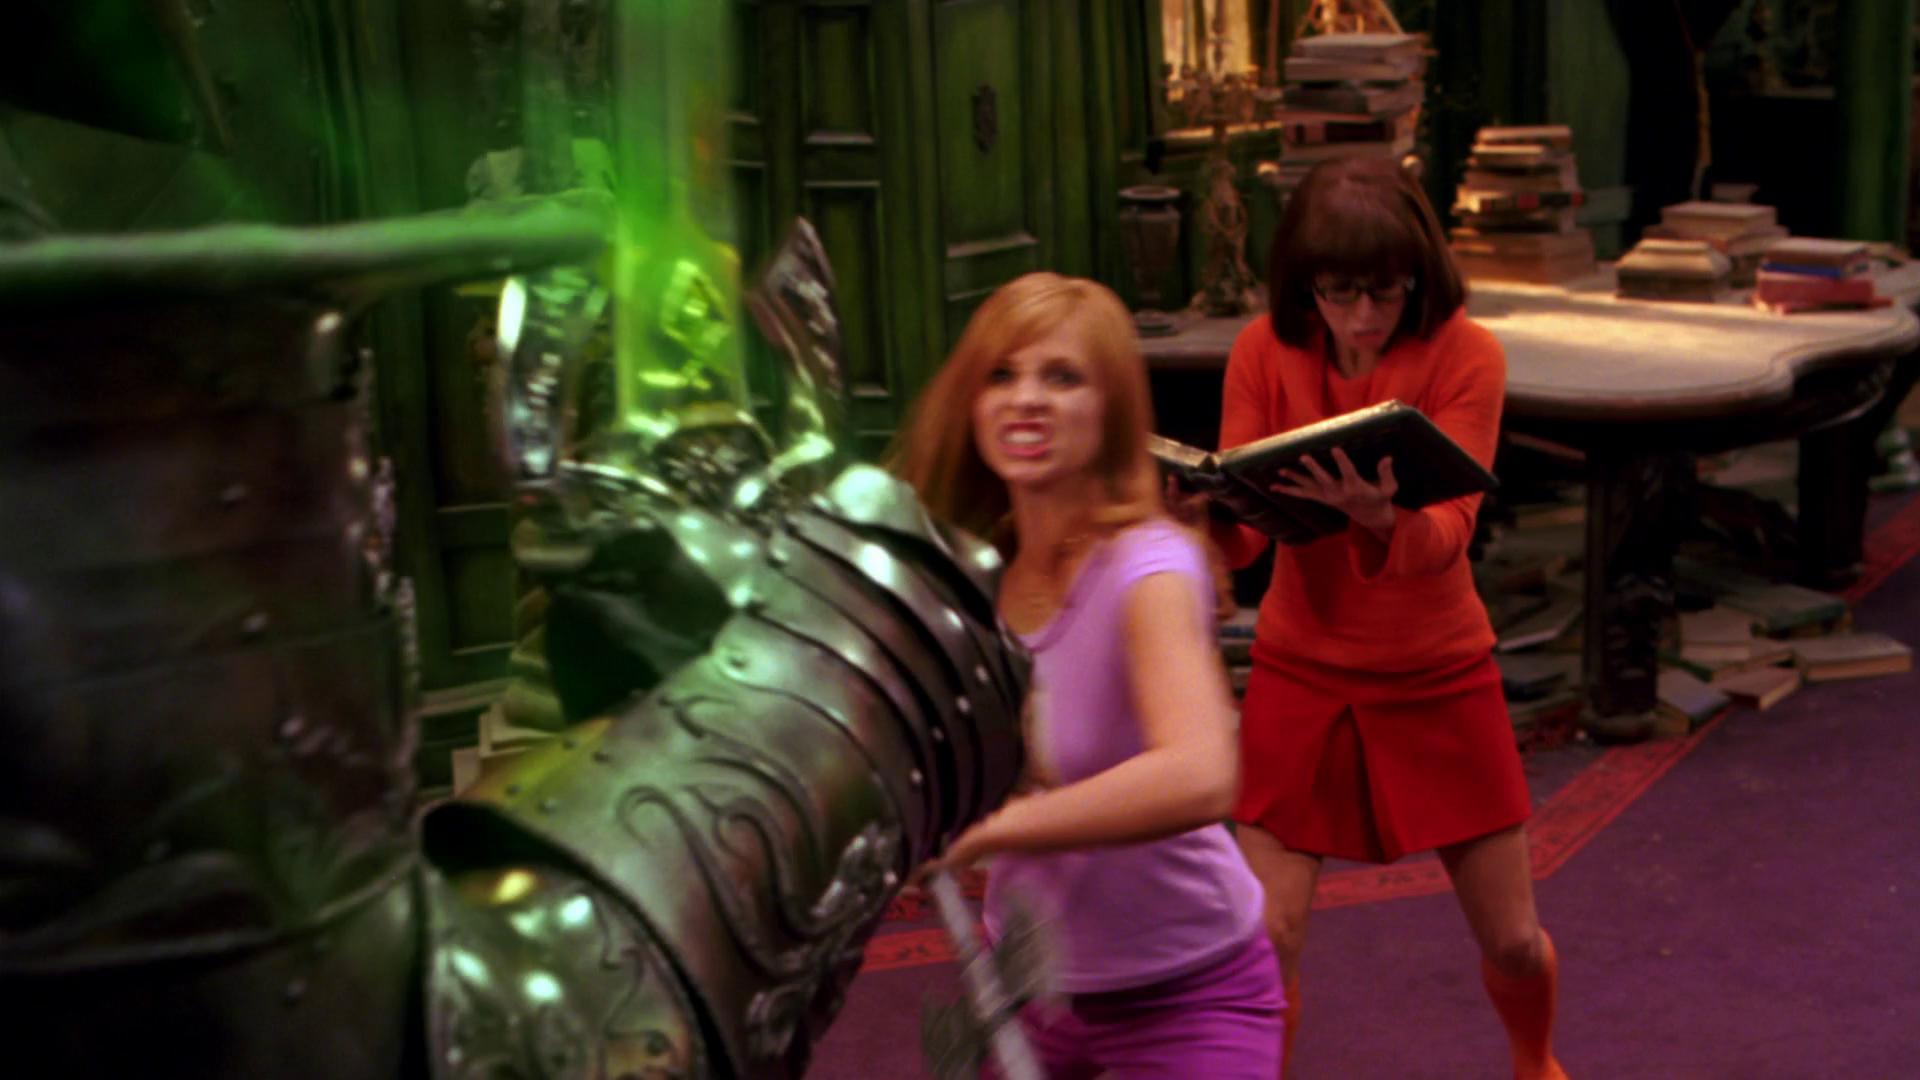 Moviery.com - Download the Movie Scooby Doo 2: Monsters Unleashed